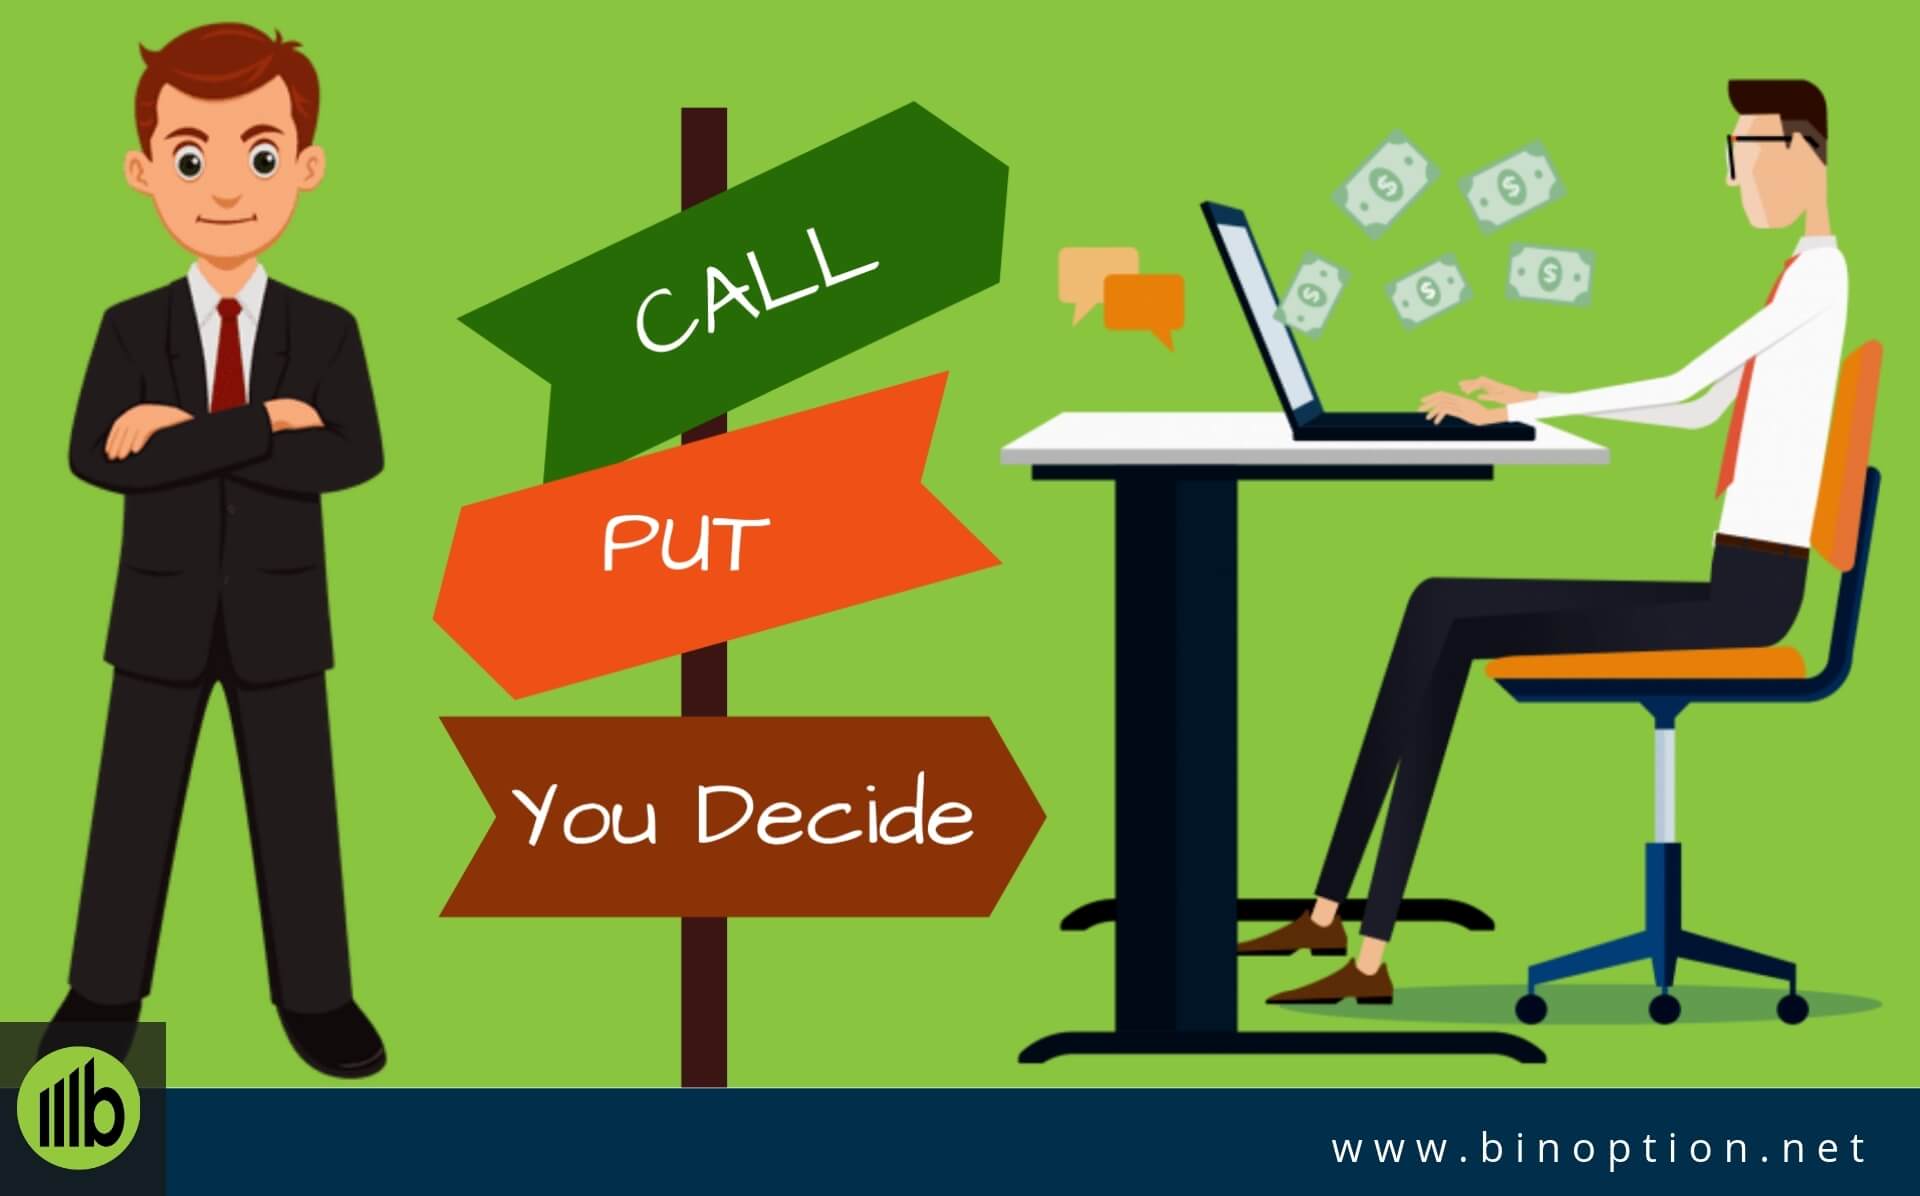 Whats the difference between binary options & forex trading